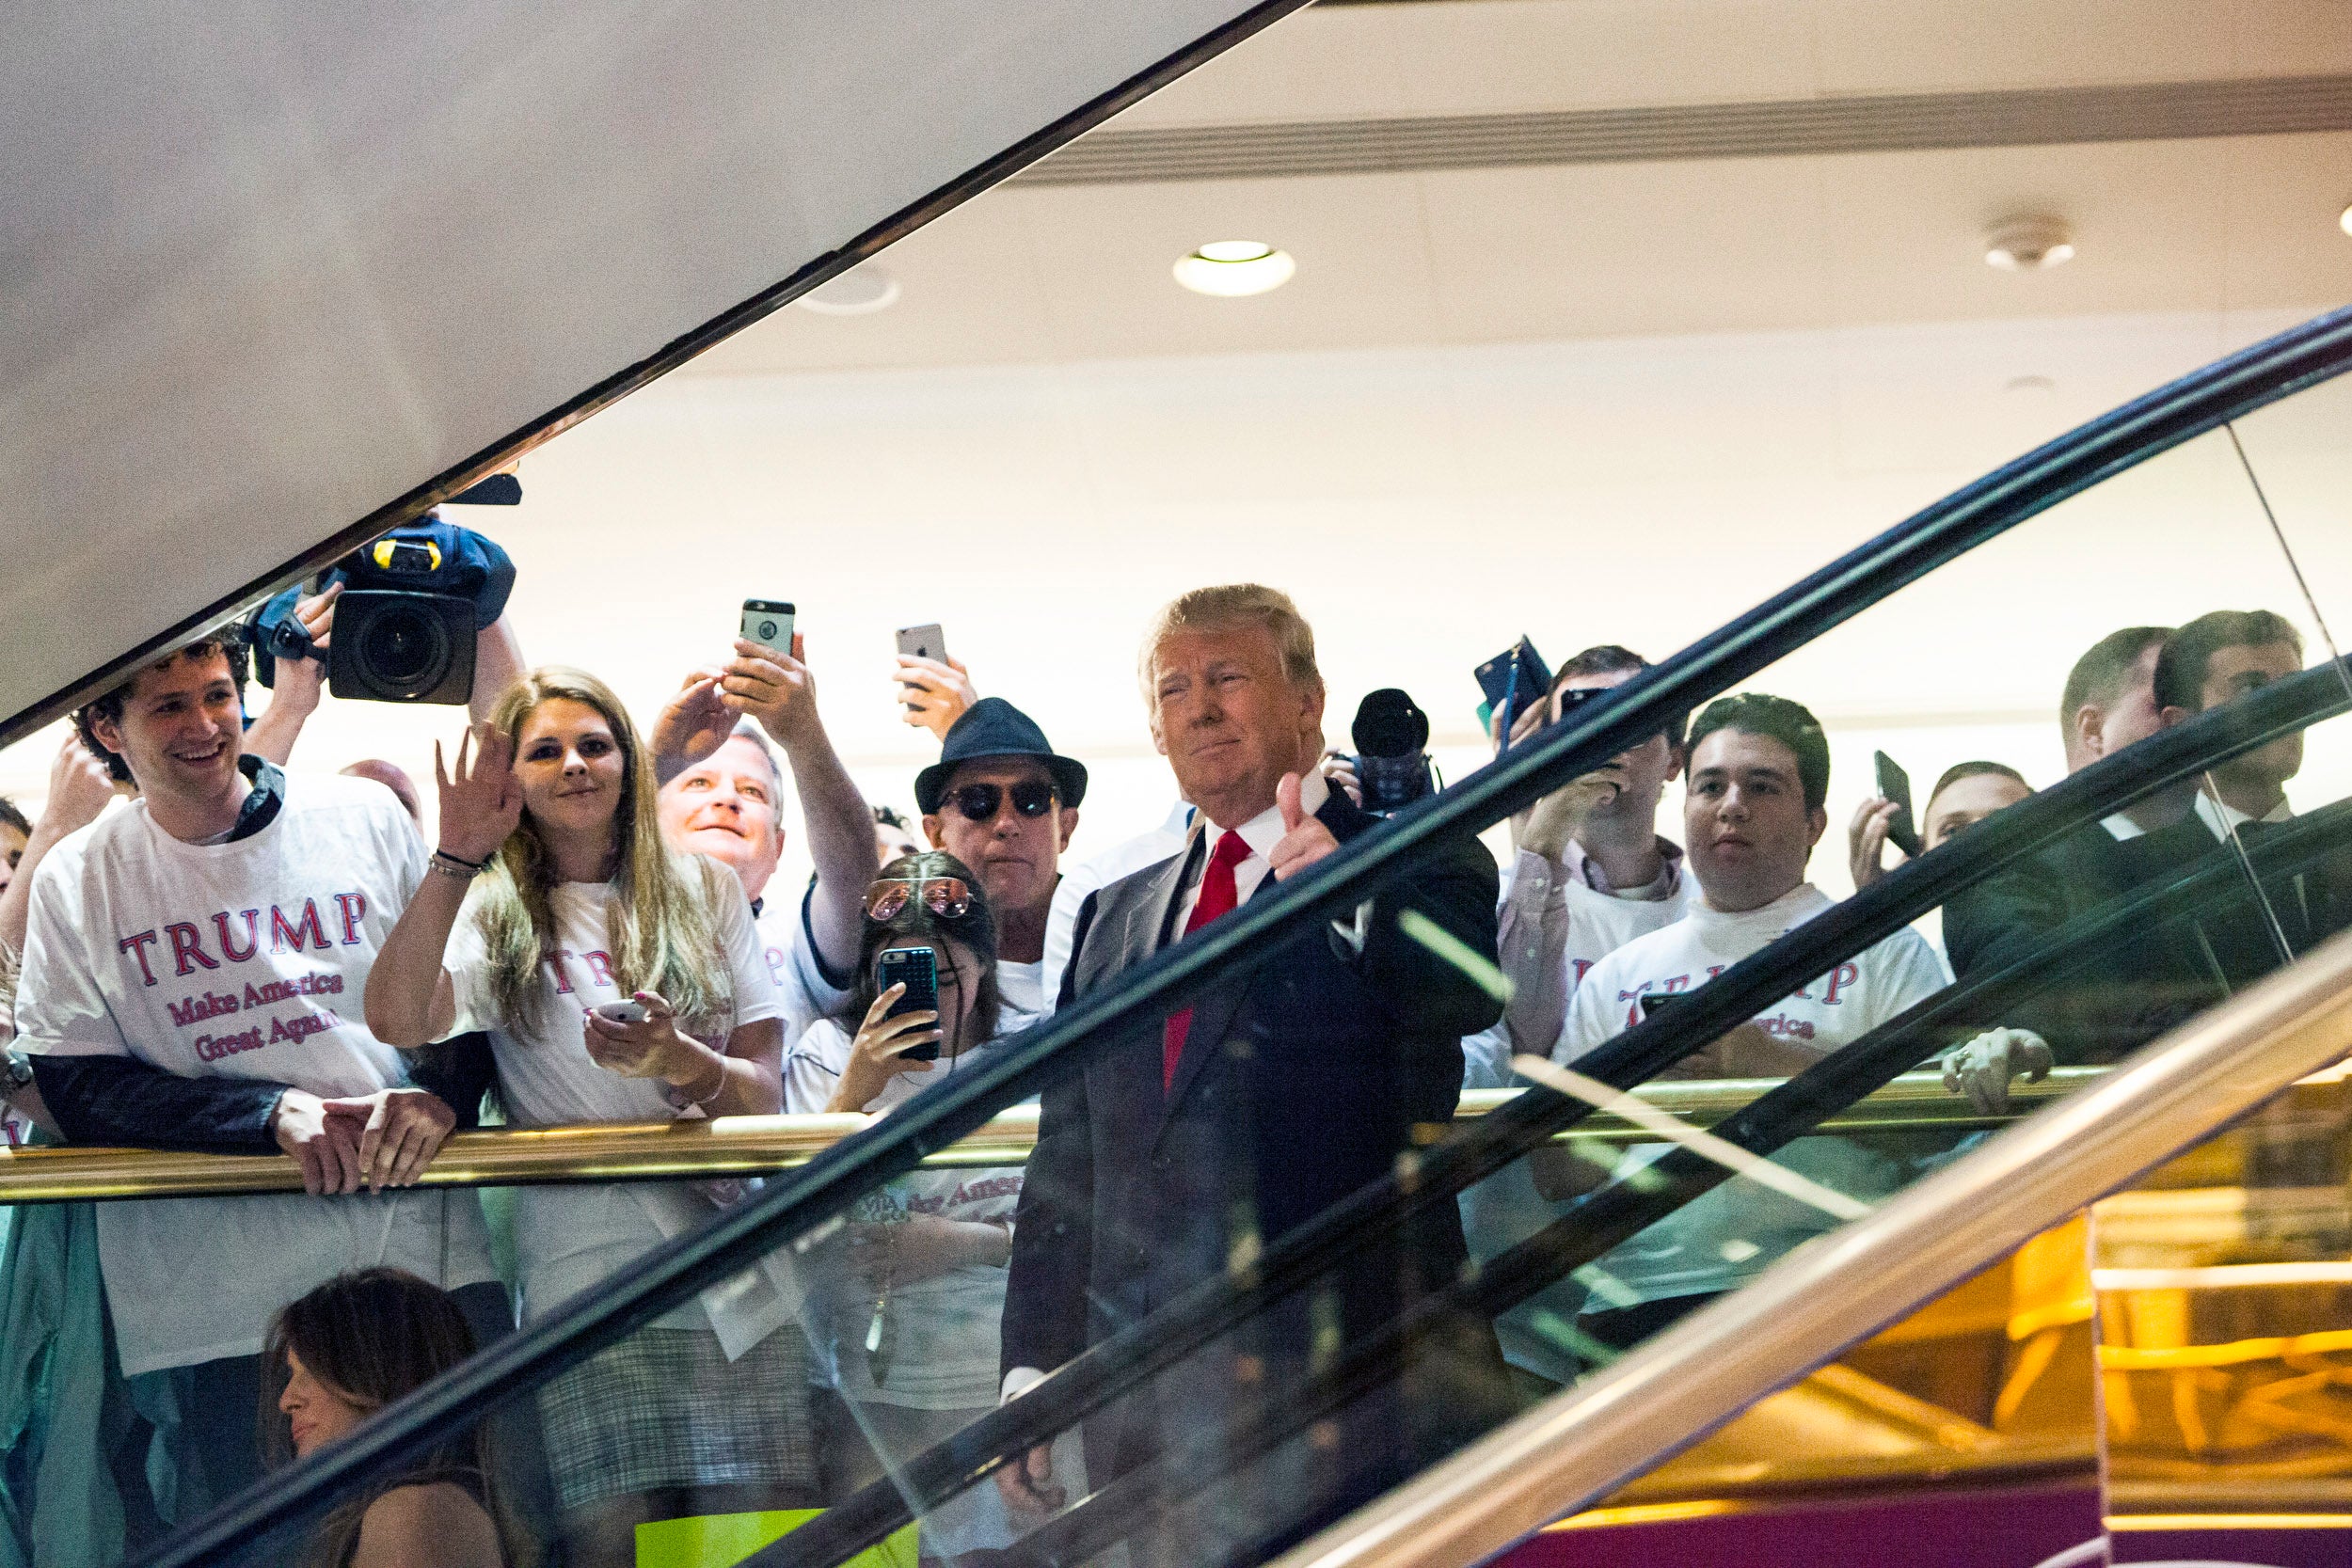 Donald Trump rides down a golden escalator in his New York skyscraper to a press event announcing his candidacy for the presidency on 16 June 2015